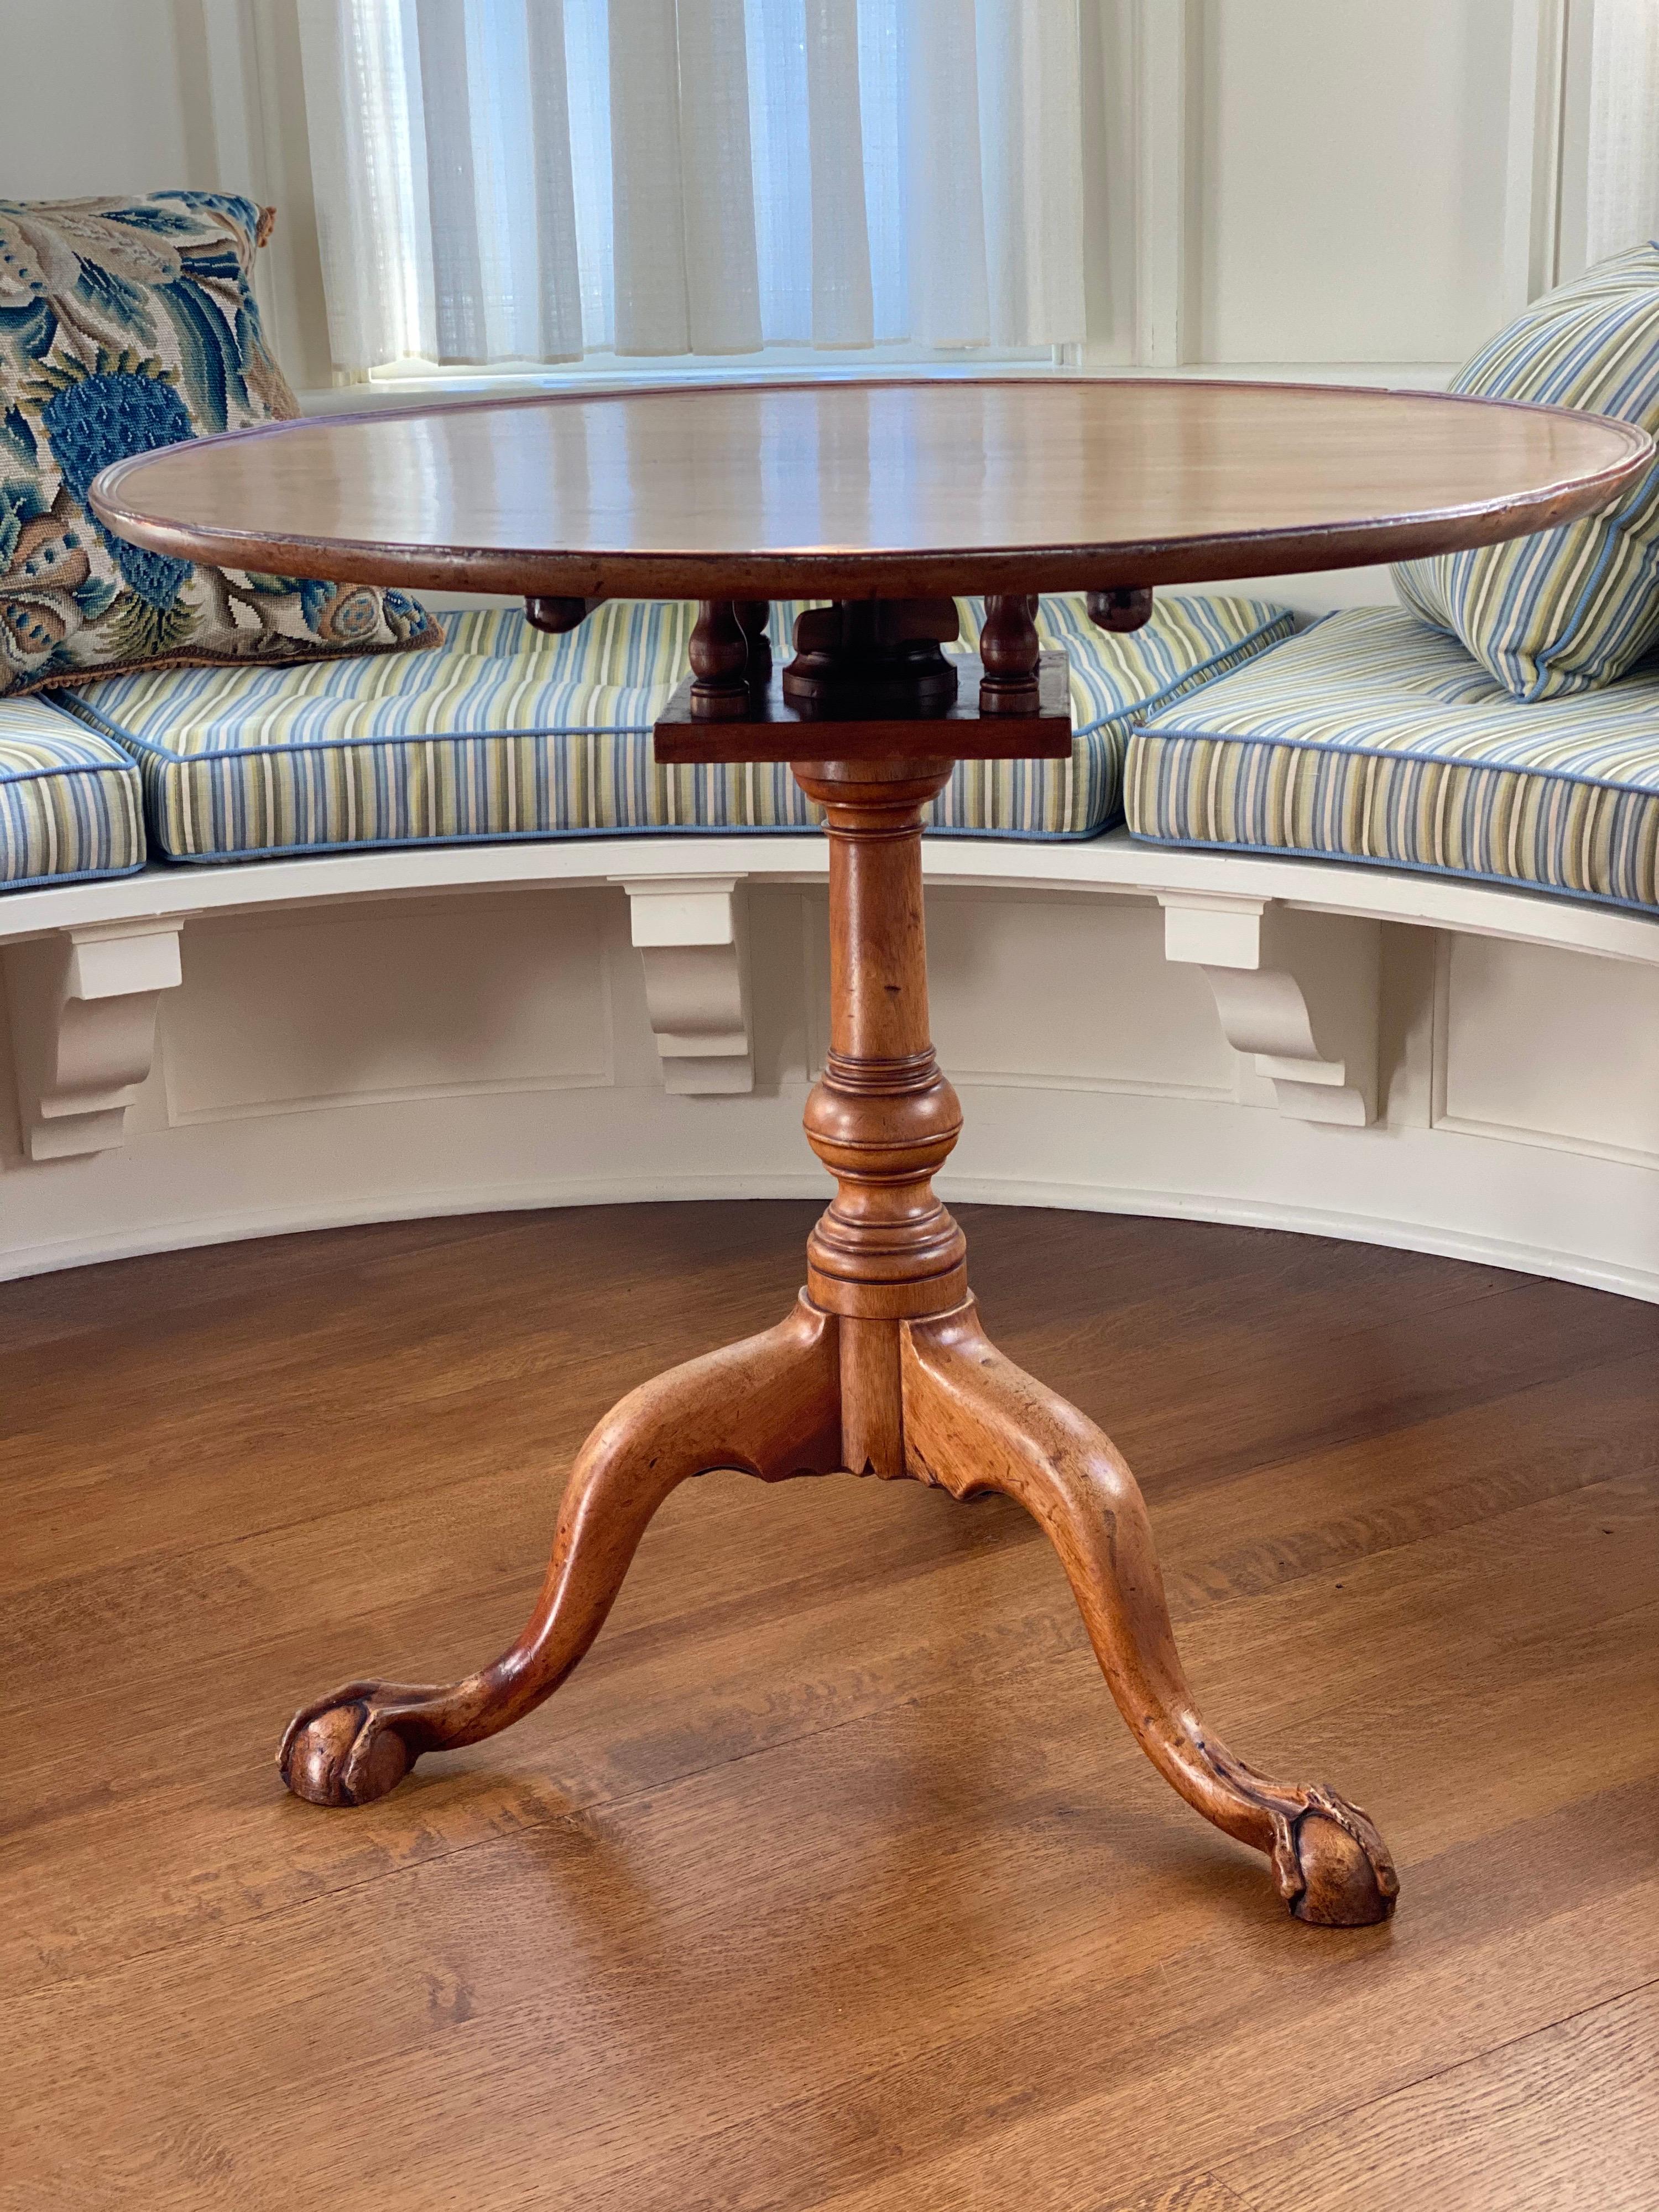 Chippendale figured mahogany dished tilt-top tea table, circa 1765
Squashed ball and claw foot, set on a 'birdcage'. Ring turned flattened or 'squashed' ball stem is supported by cabriole legs ending in boldly carved ball and claw